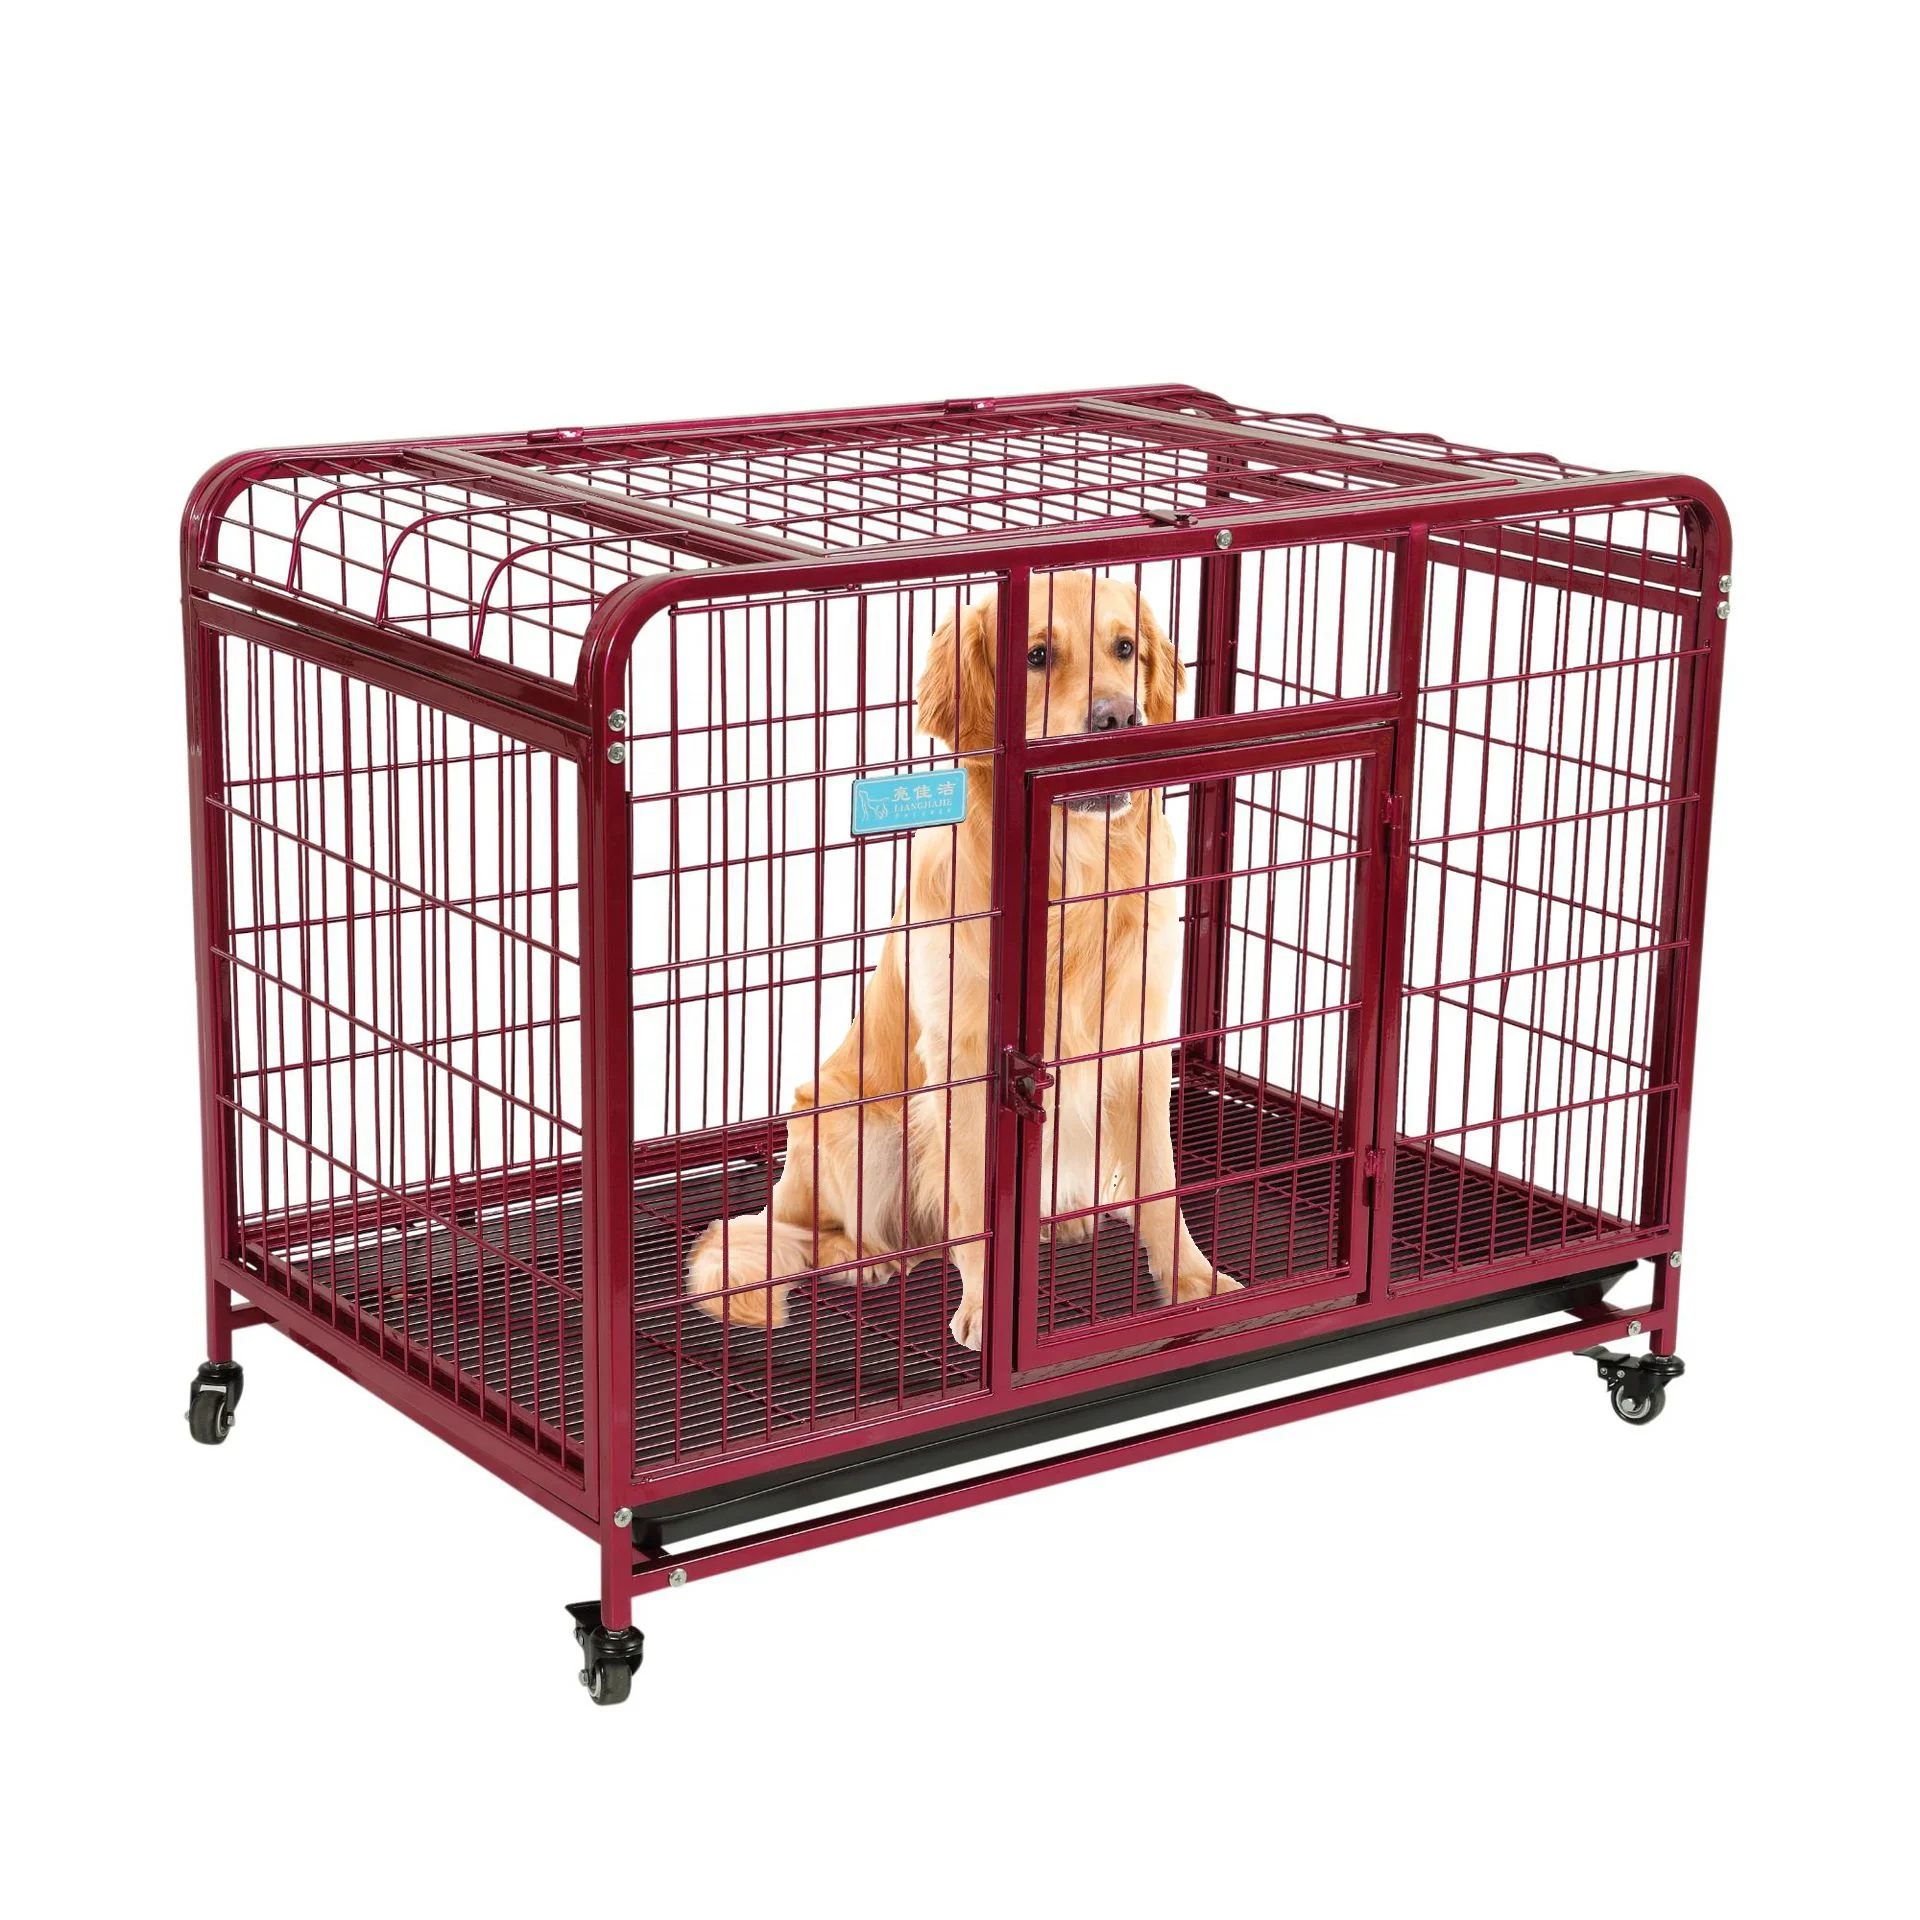 

Lorenzo OEM Jaula Perros L L78xW48xH66 Kandang Kucing China Small Pet Cage For Cats Bird Canary Carriers House Sale Dog Cages, Sparkling silver, rose red